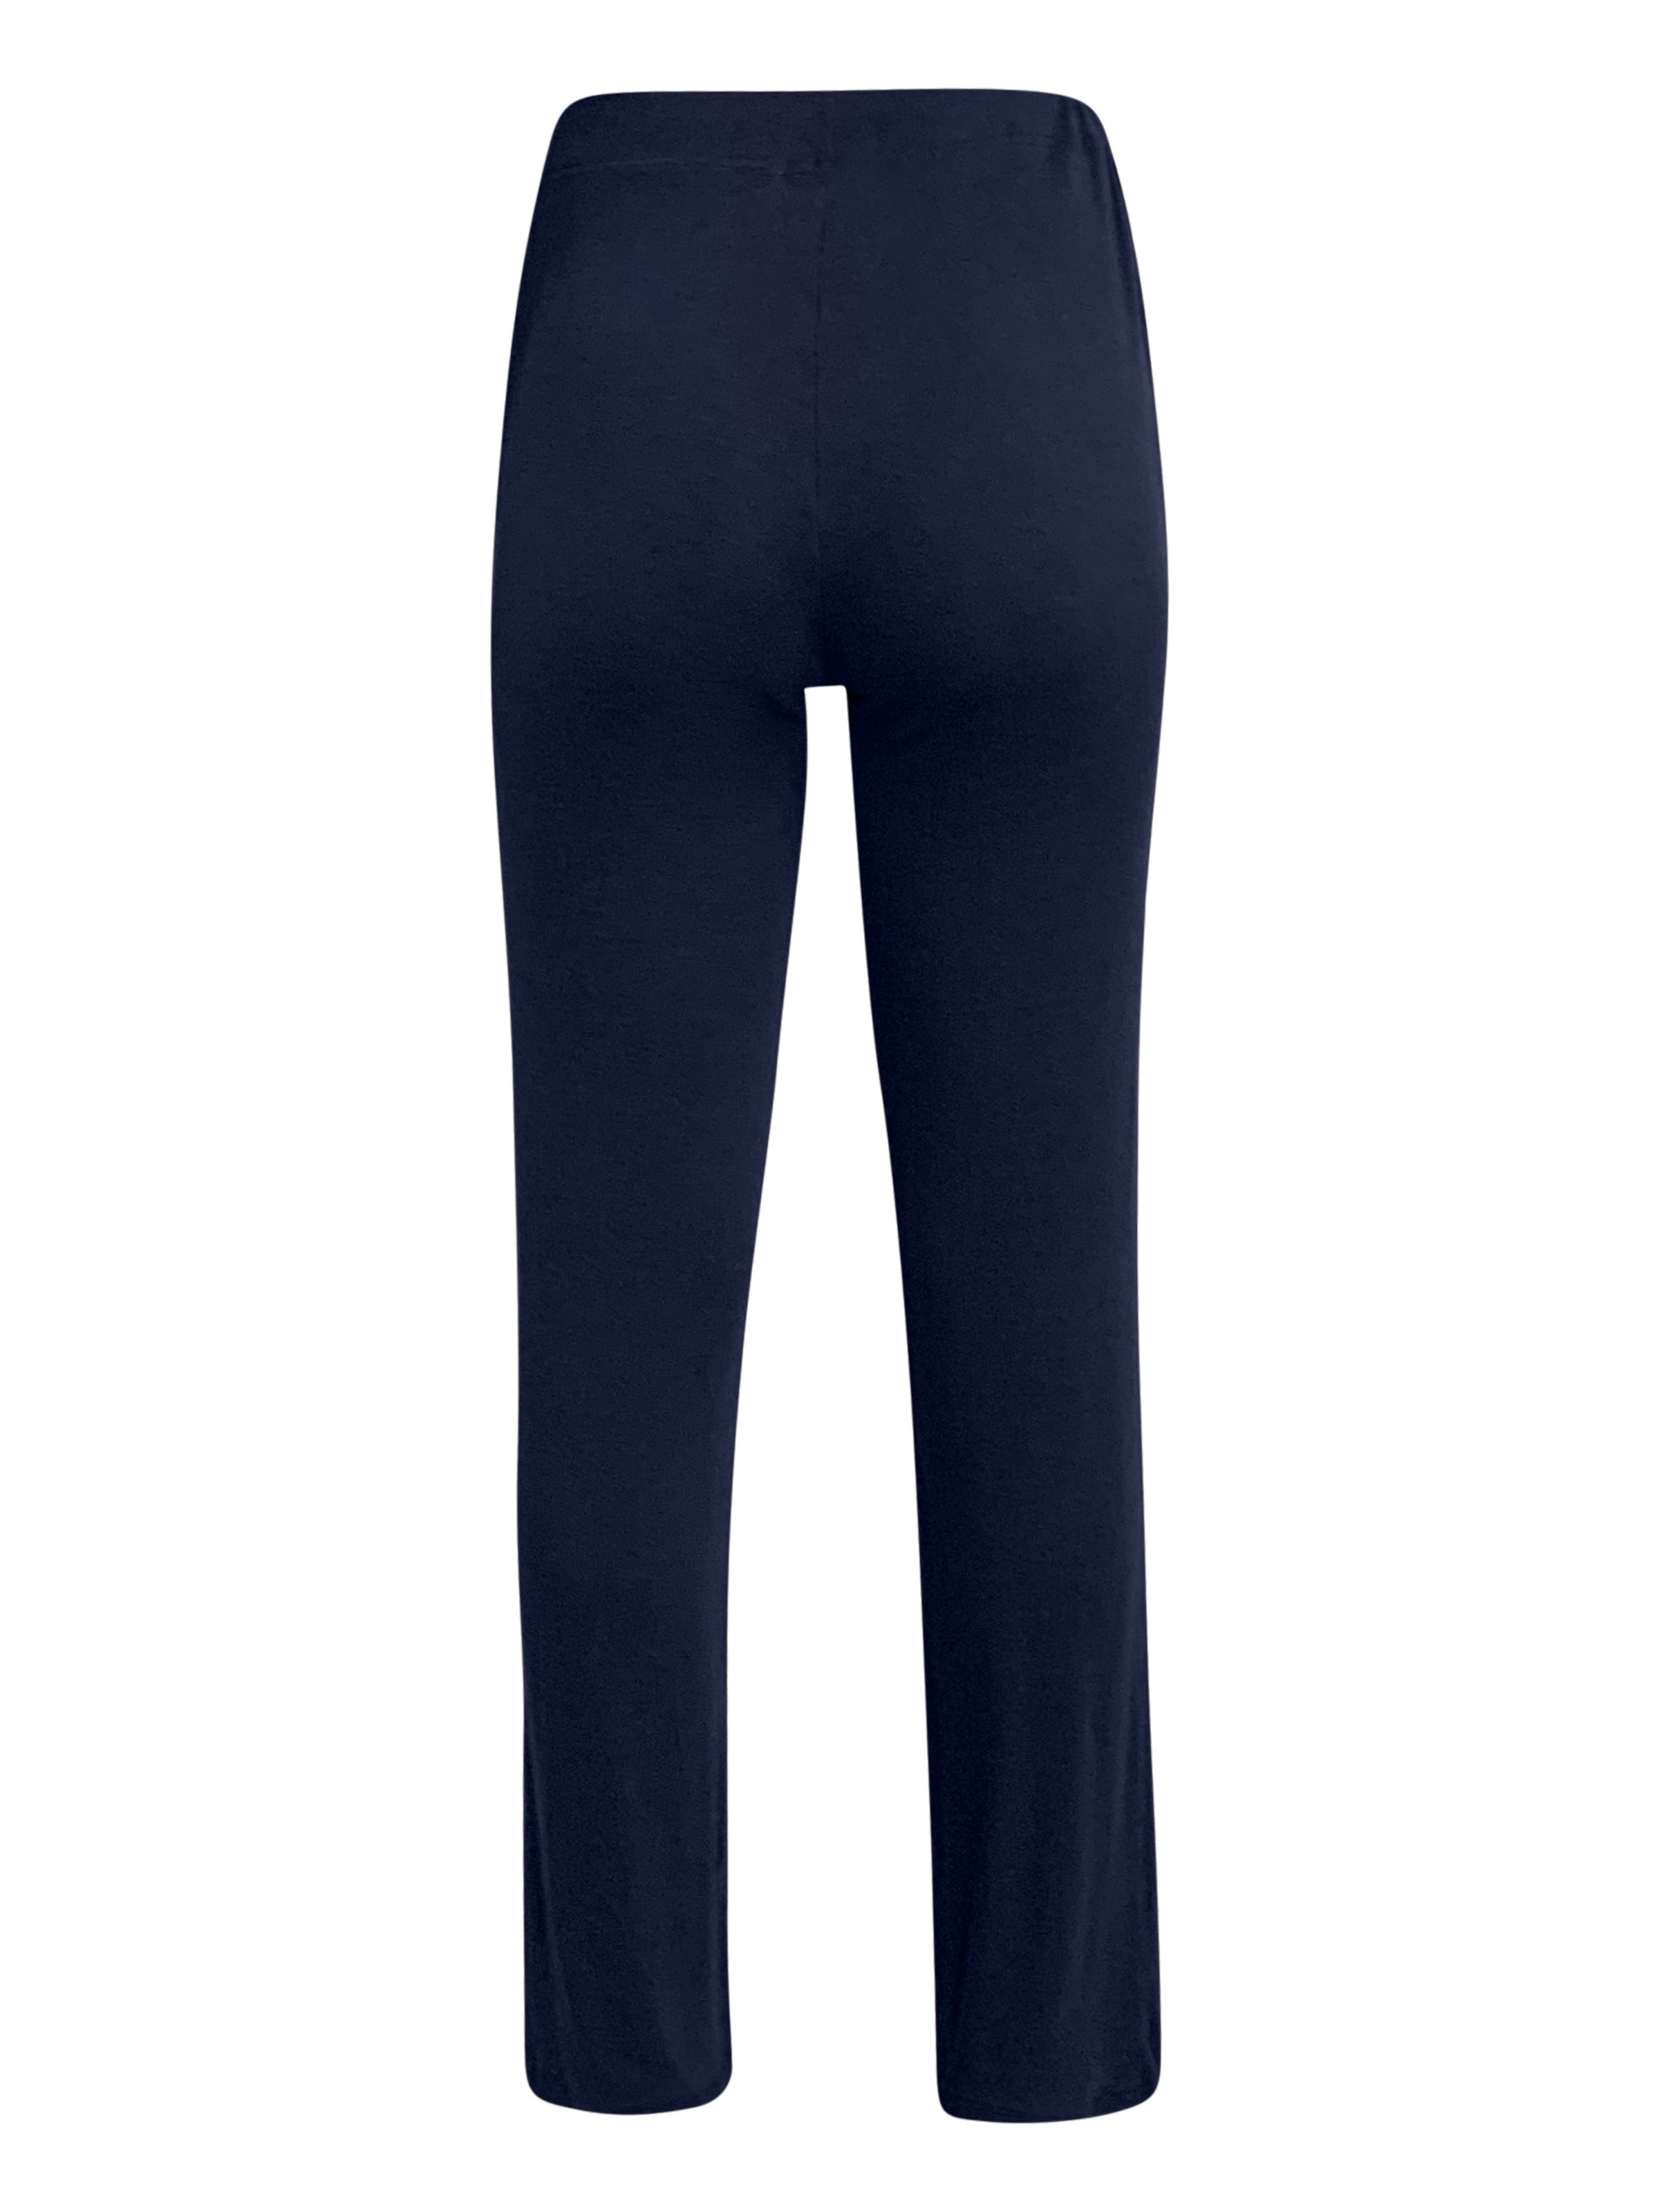 Love To Chill Navy Pants – EK The Label